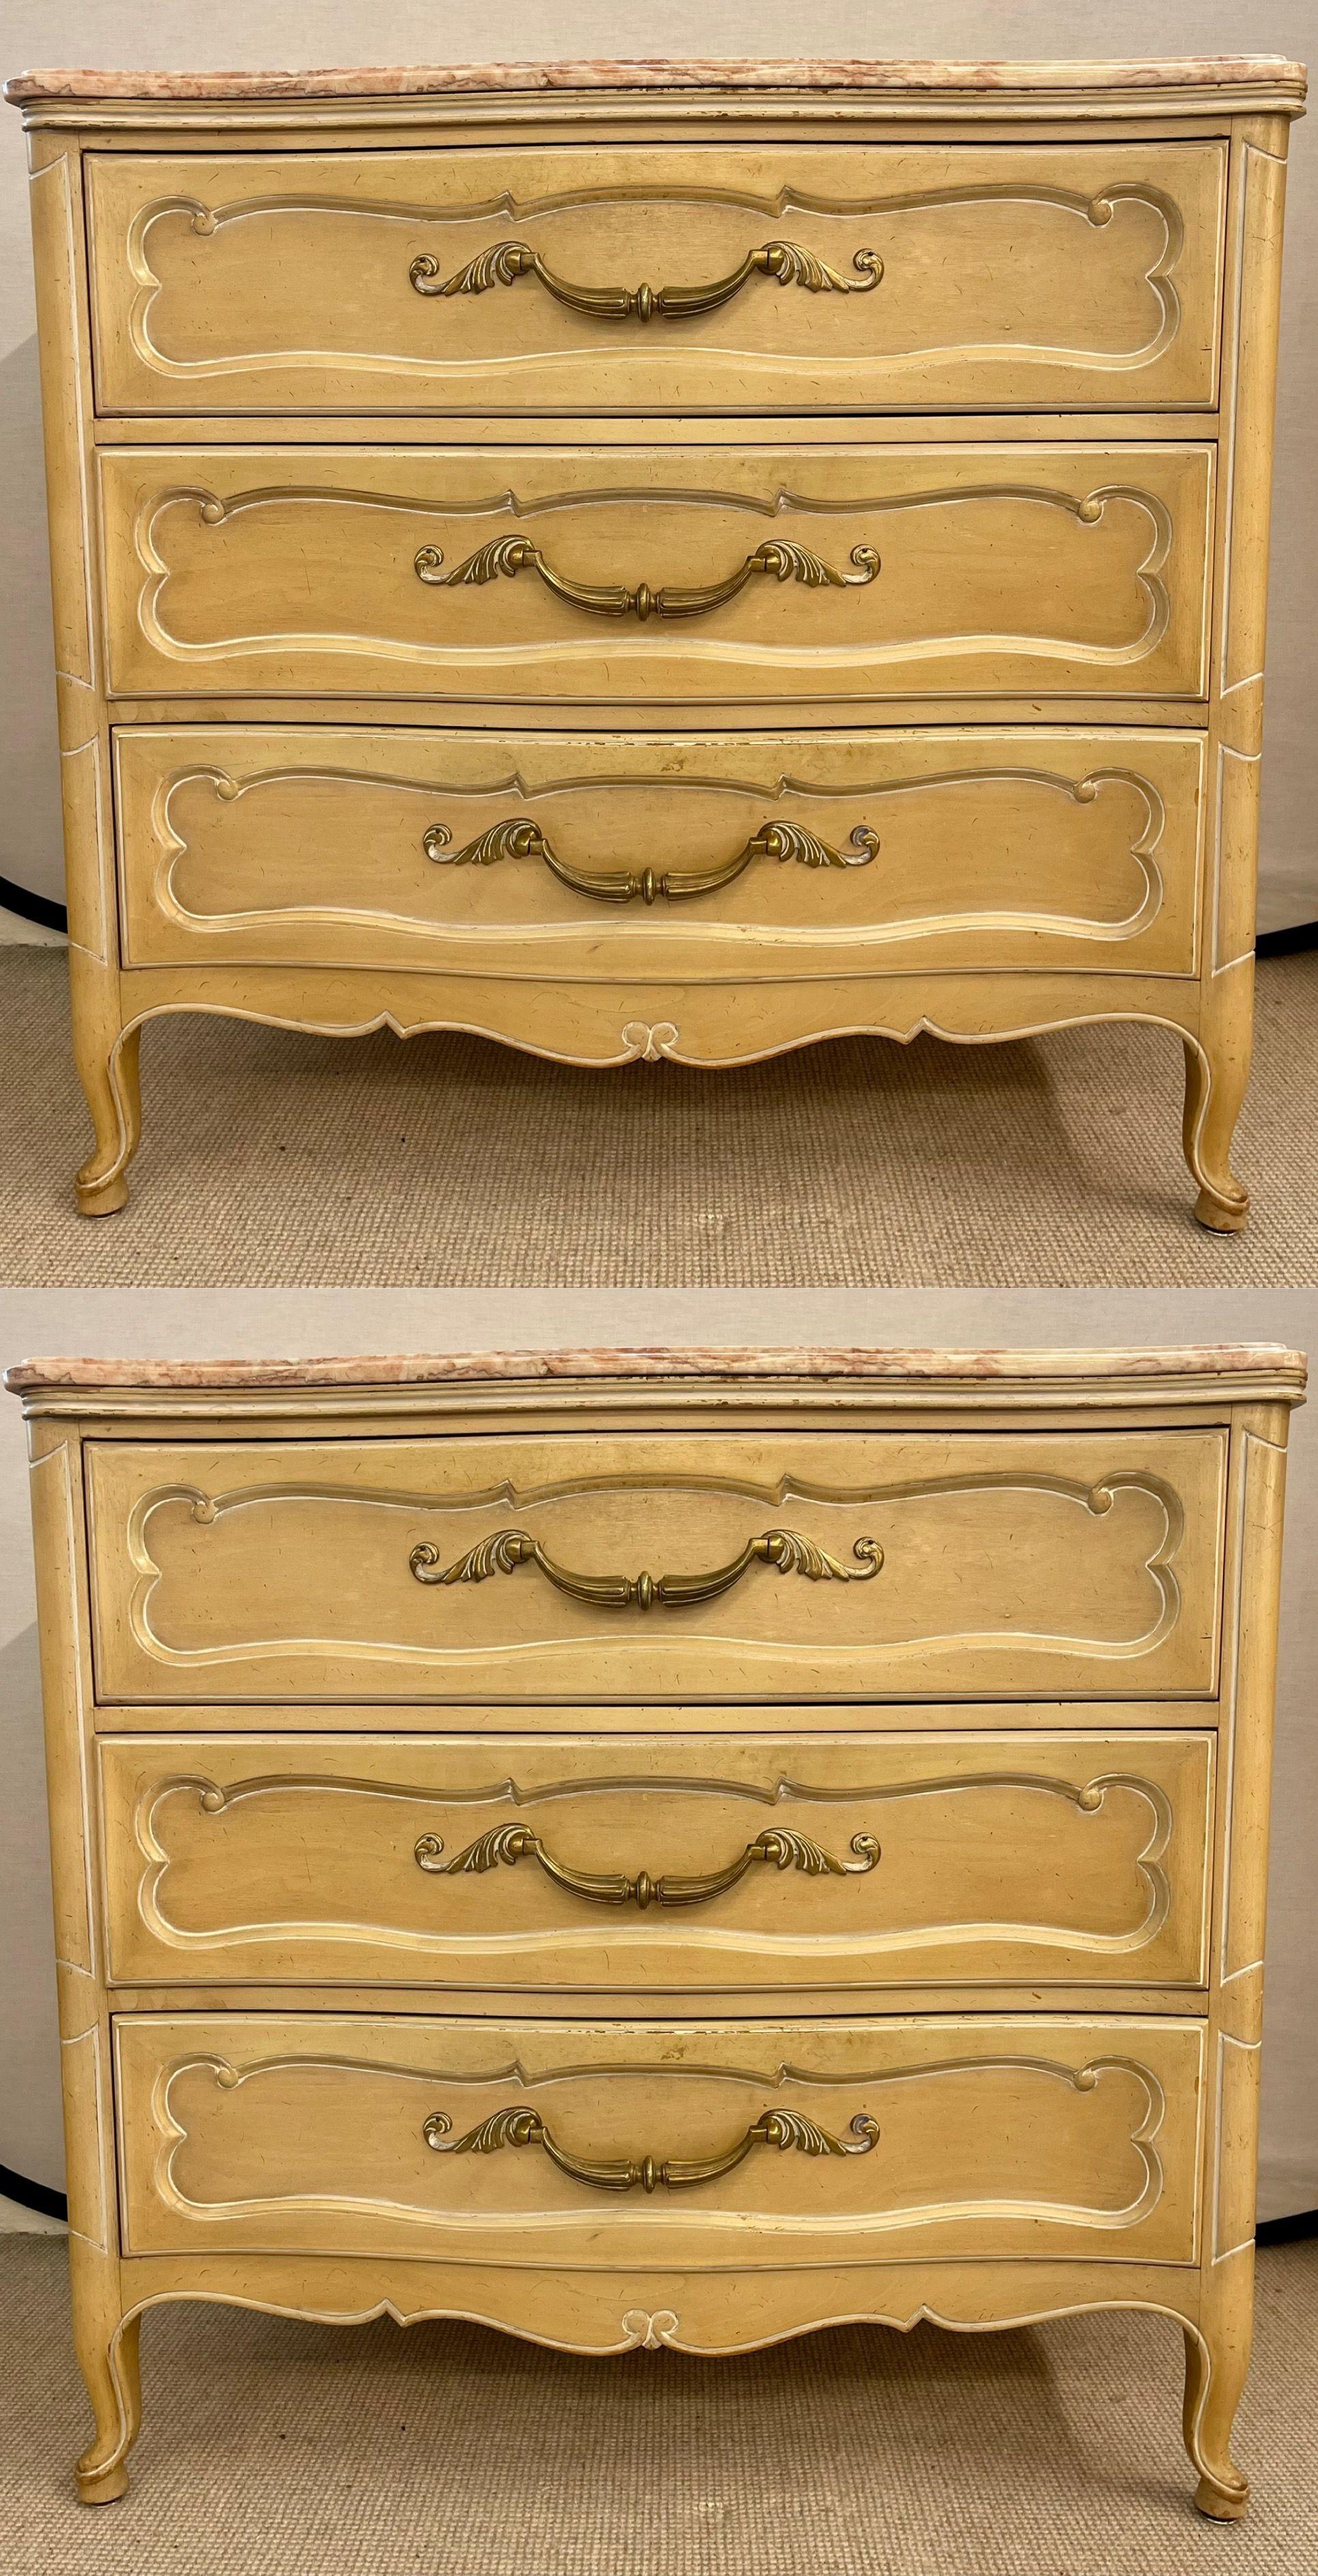 Louis XV style Grosfeld House marble-top four-drawer commodes. All drawers are lined. The color is a distressed cream wood, the pulls being brass. Fabulous rose and crème colored marble tops. Exquisite design.